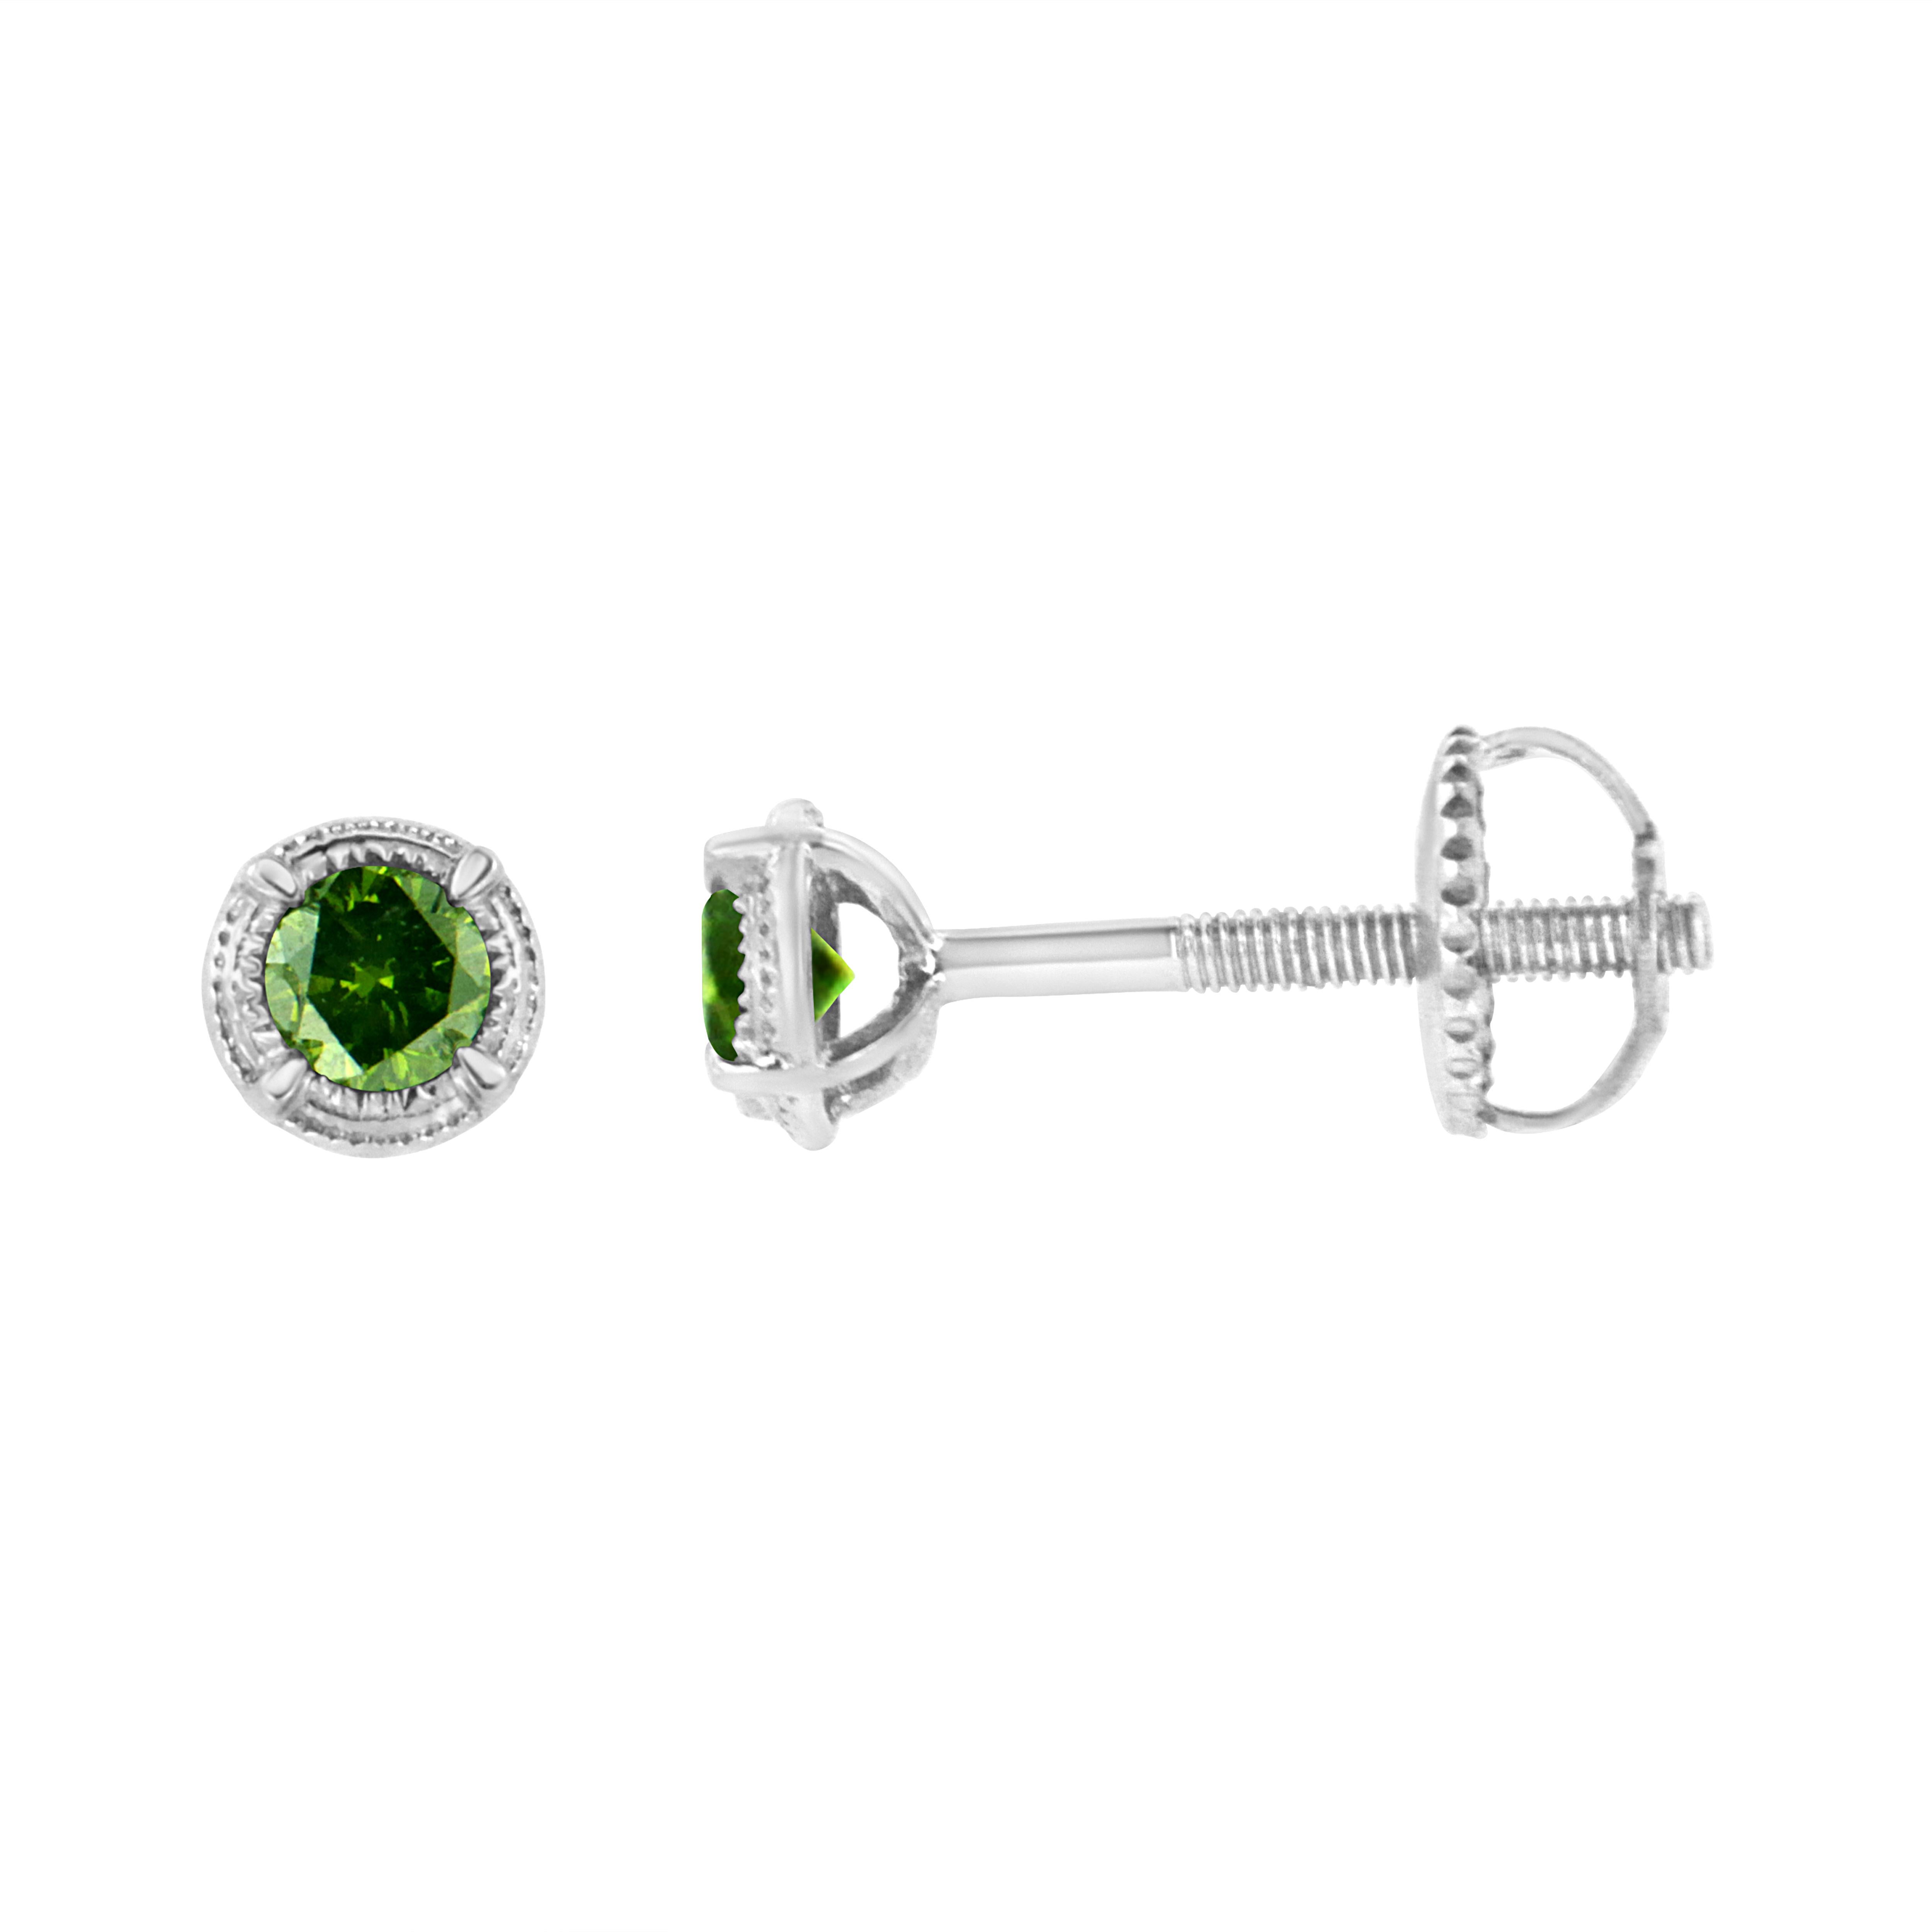 Add this stunningly unique diamond stud earrings to your jewelry collection and impress all your girlfriends. This beautiful pair of studs are made from the finest .925 sterling silver, and is embellished with treated, green round-cut diamonds in a